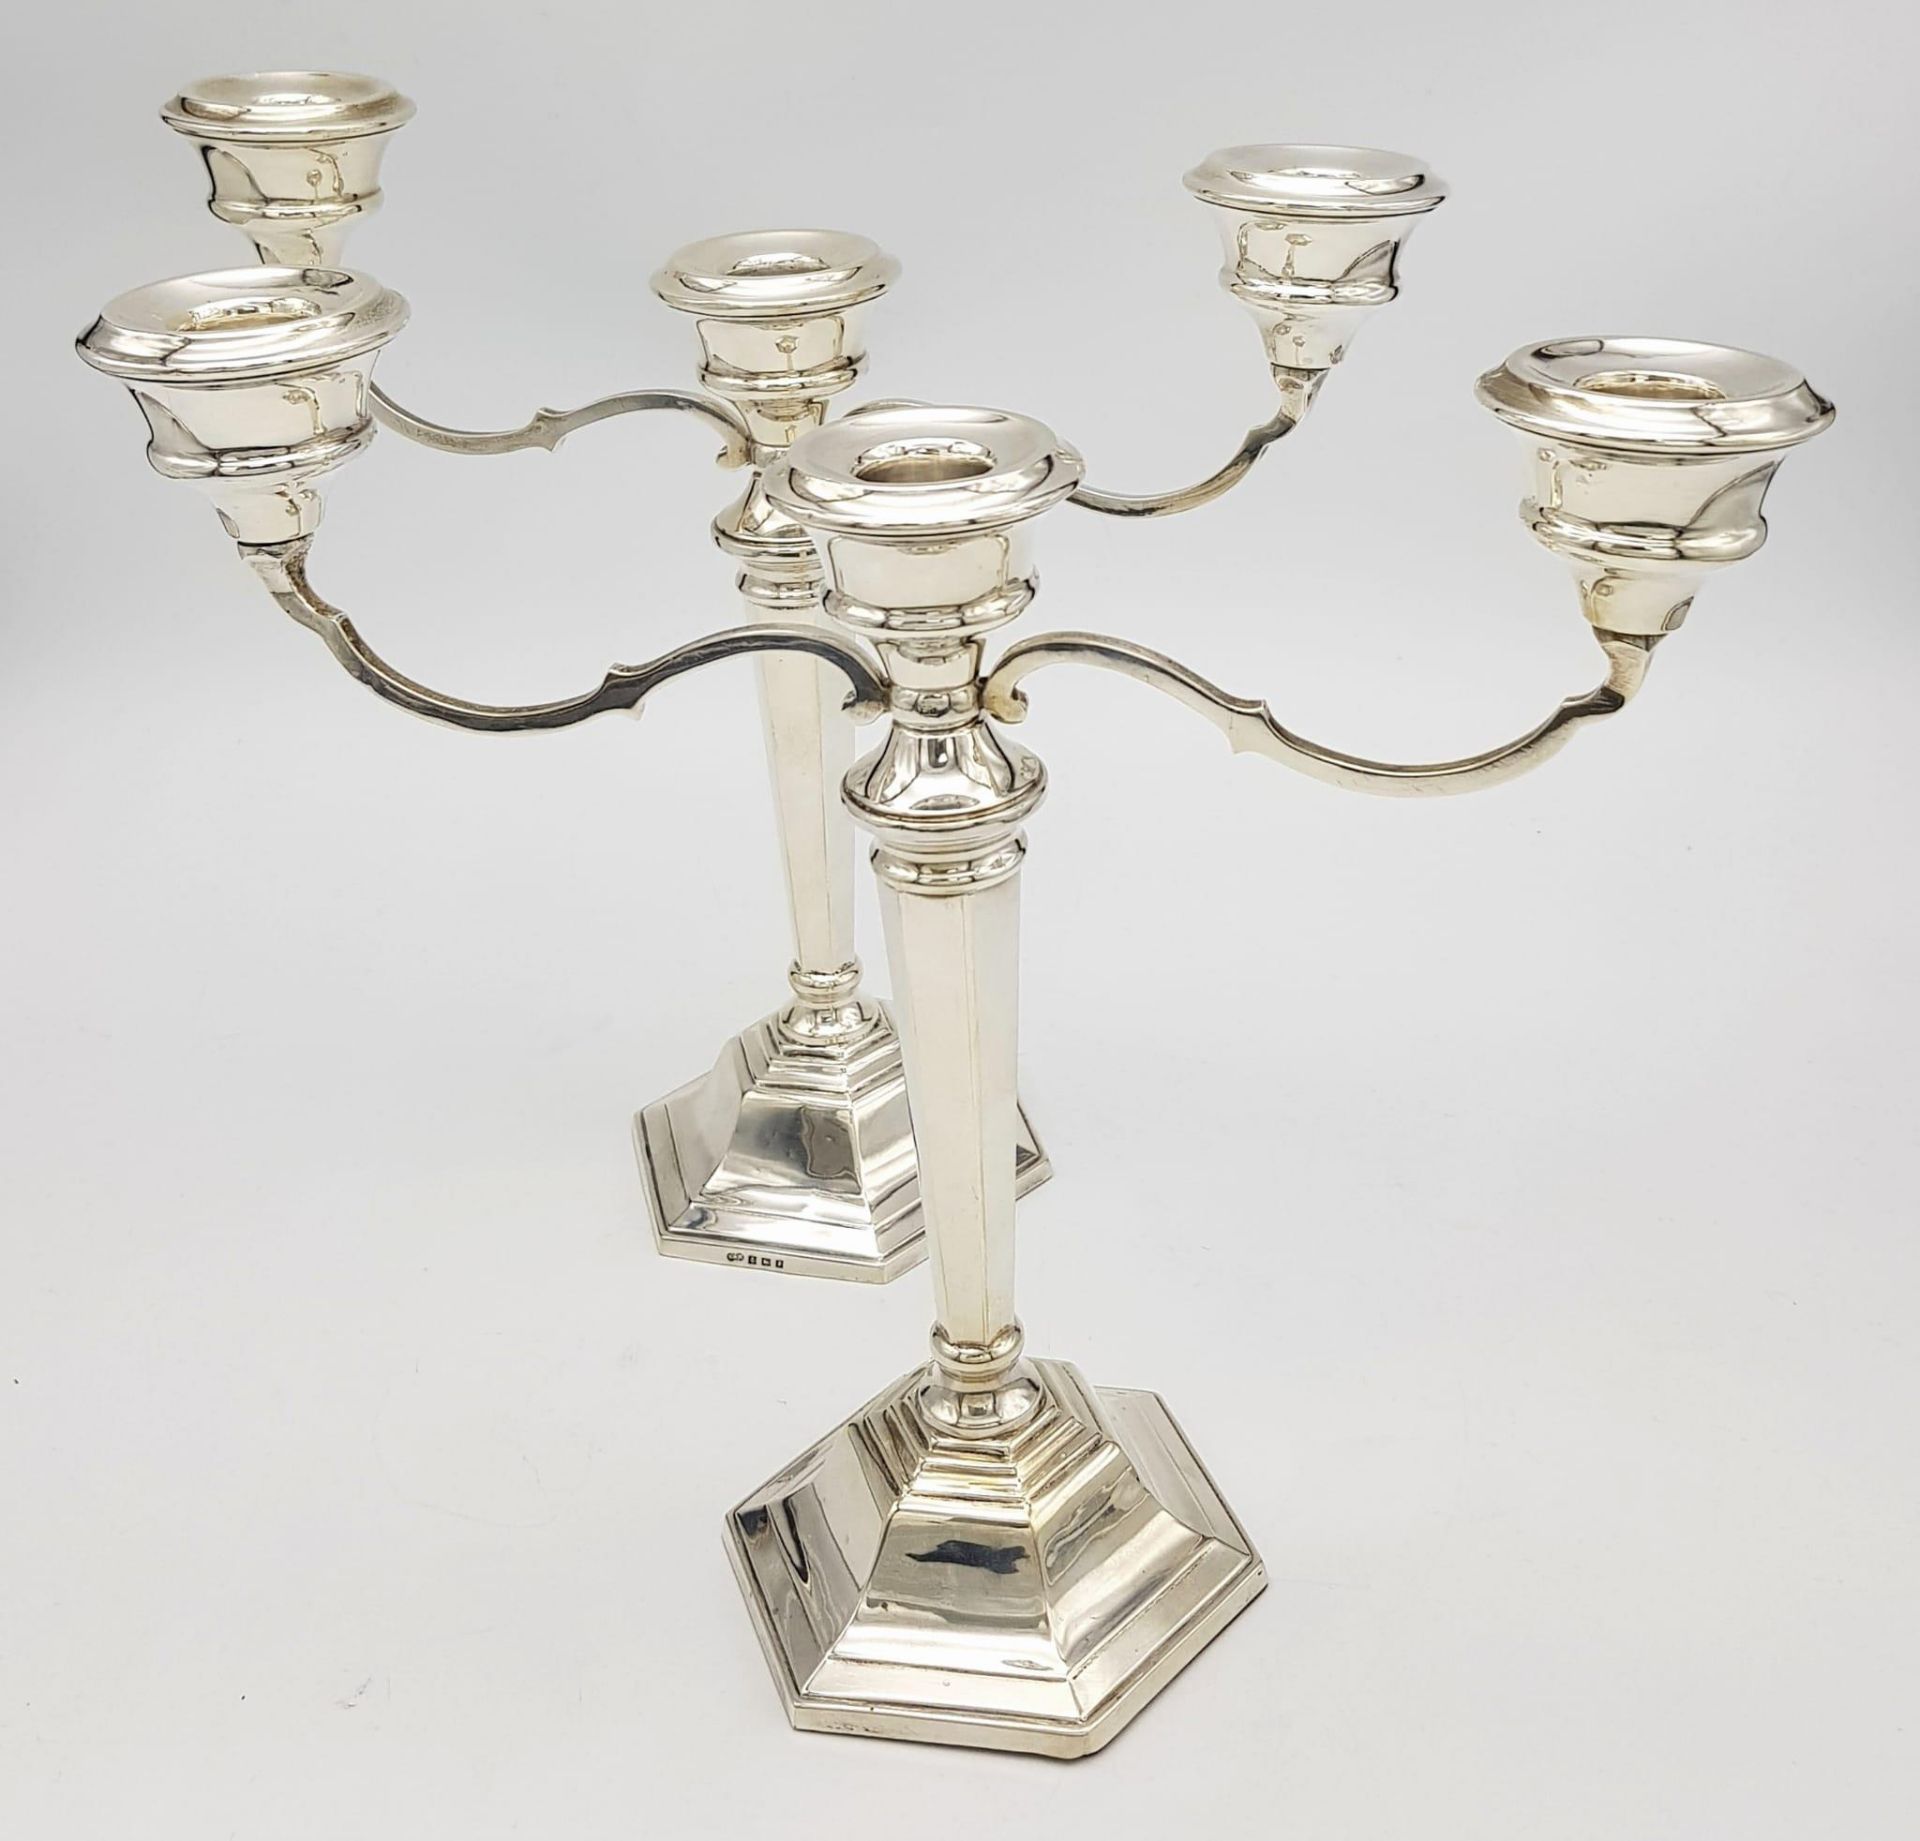 A PAIR OF SILVER CANDELABRA EACH HOLDING 3 CANDLES IN CLASSIC STYLE AND HALLMARKED IN BIRMINGHAM